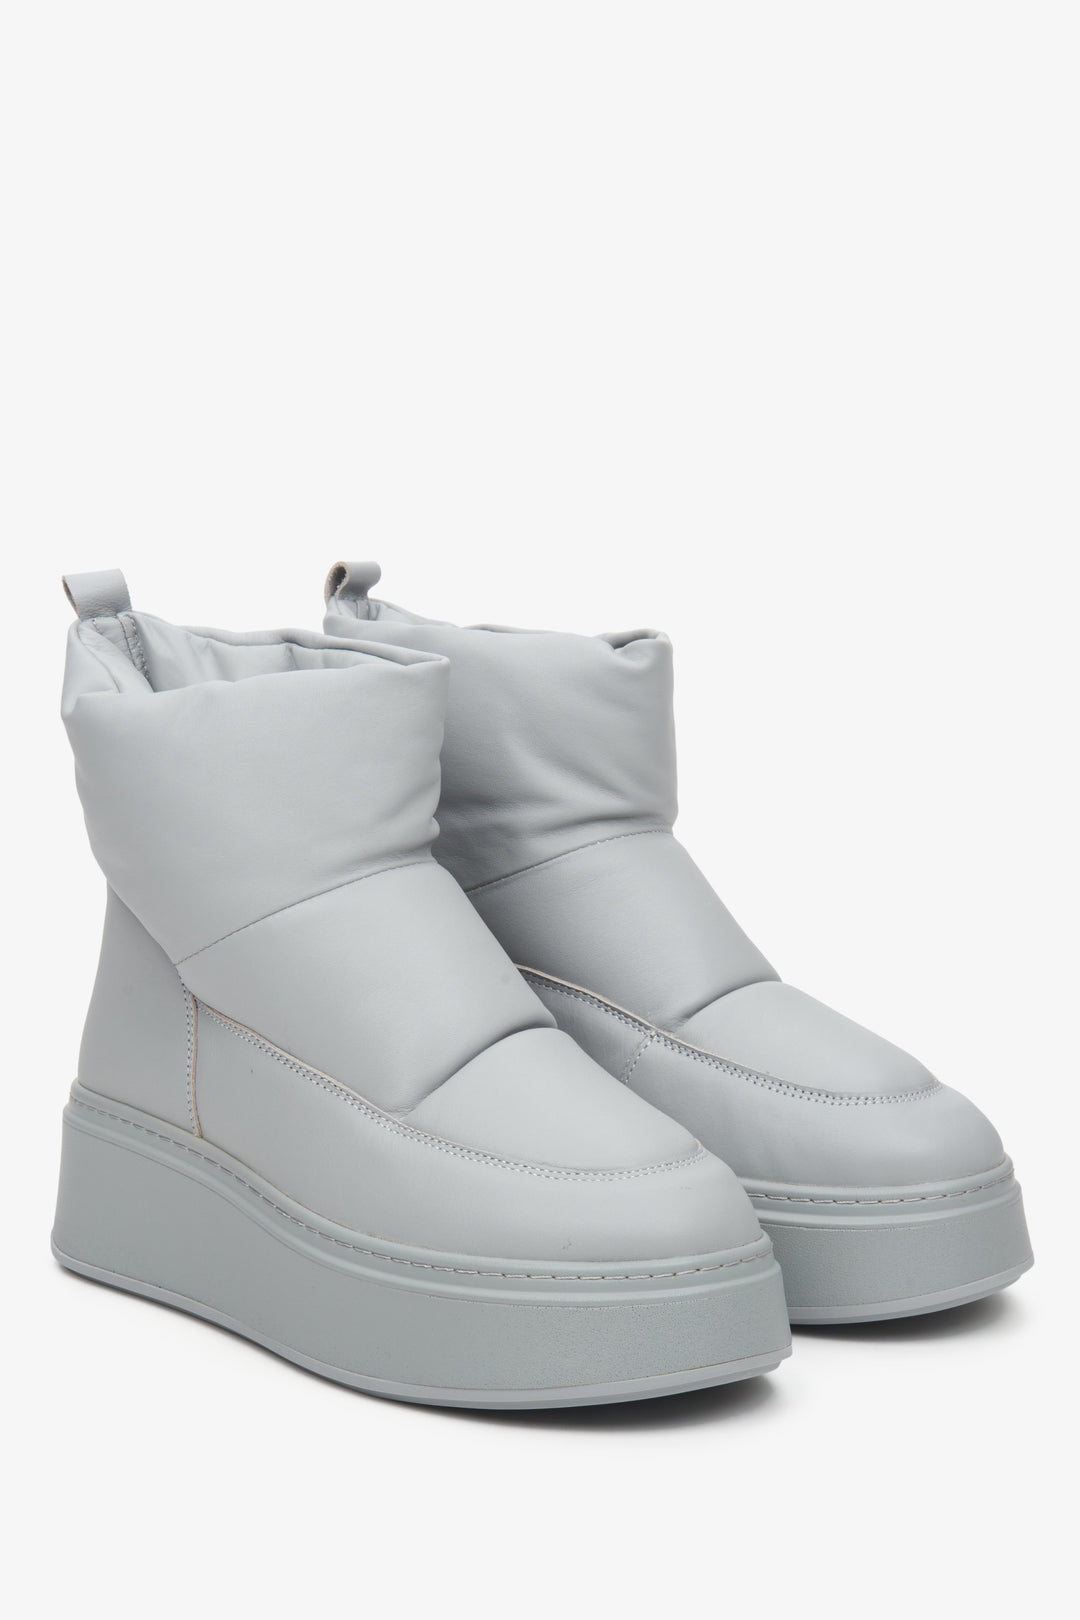 Women's grey leather snow boots made of genuine leather.